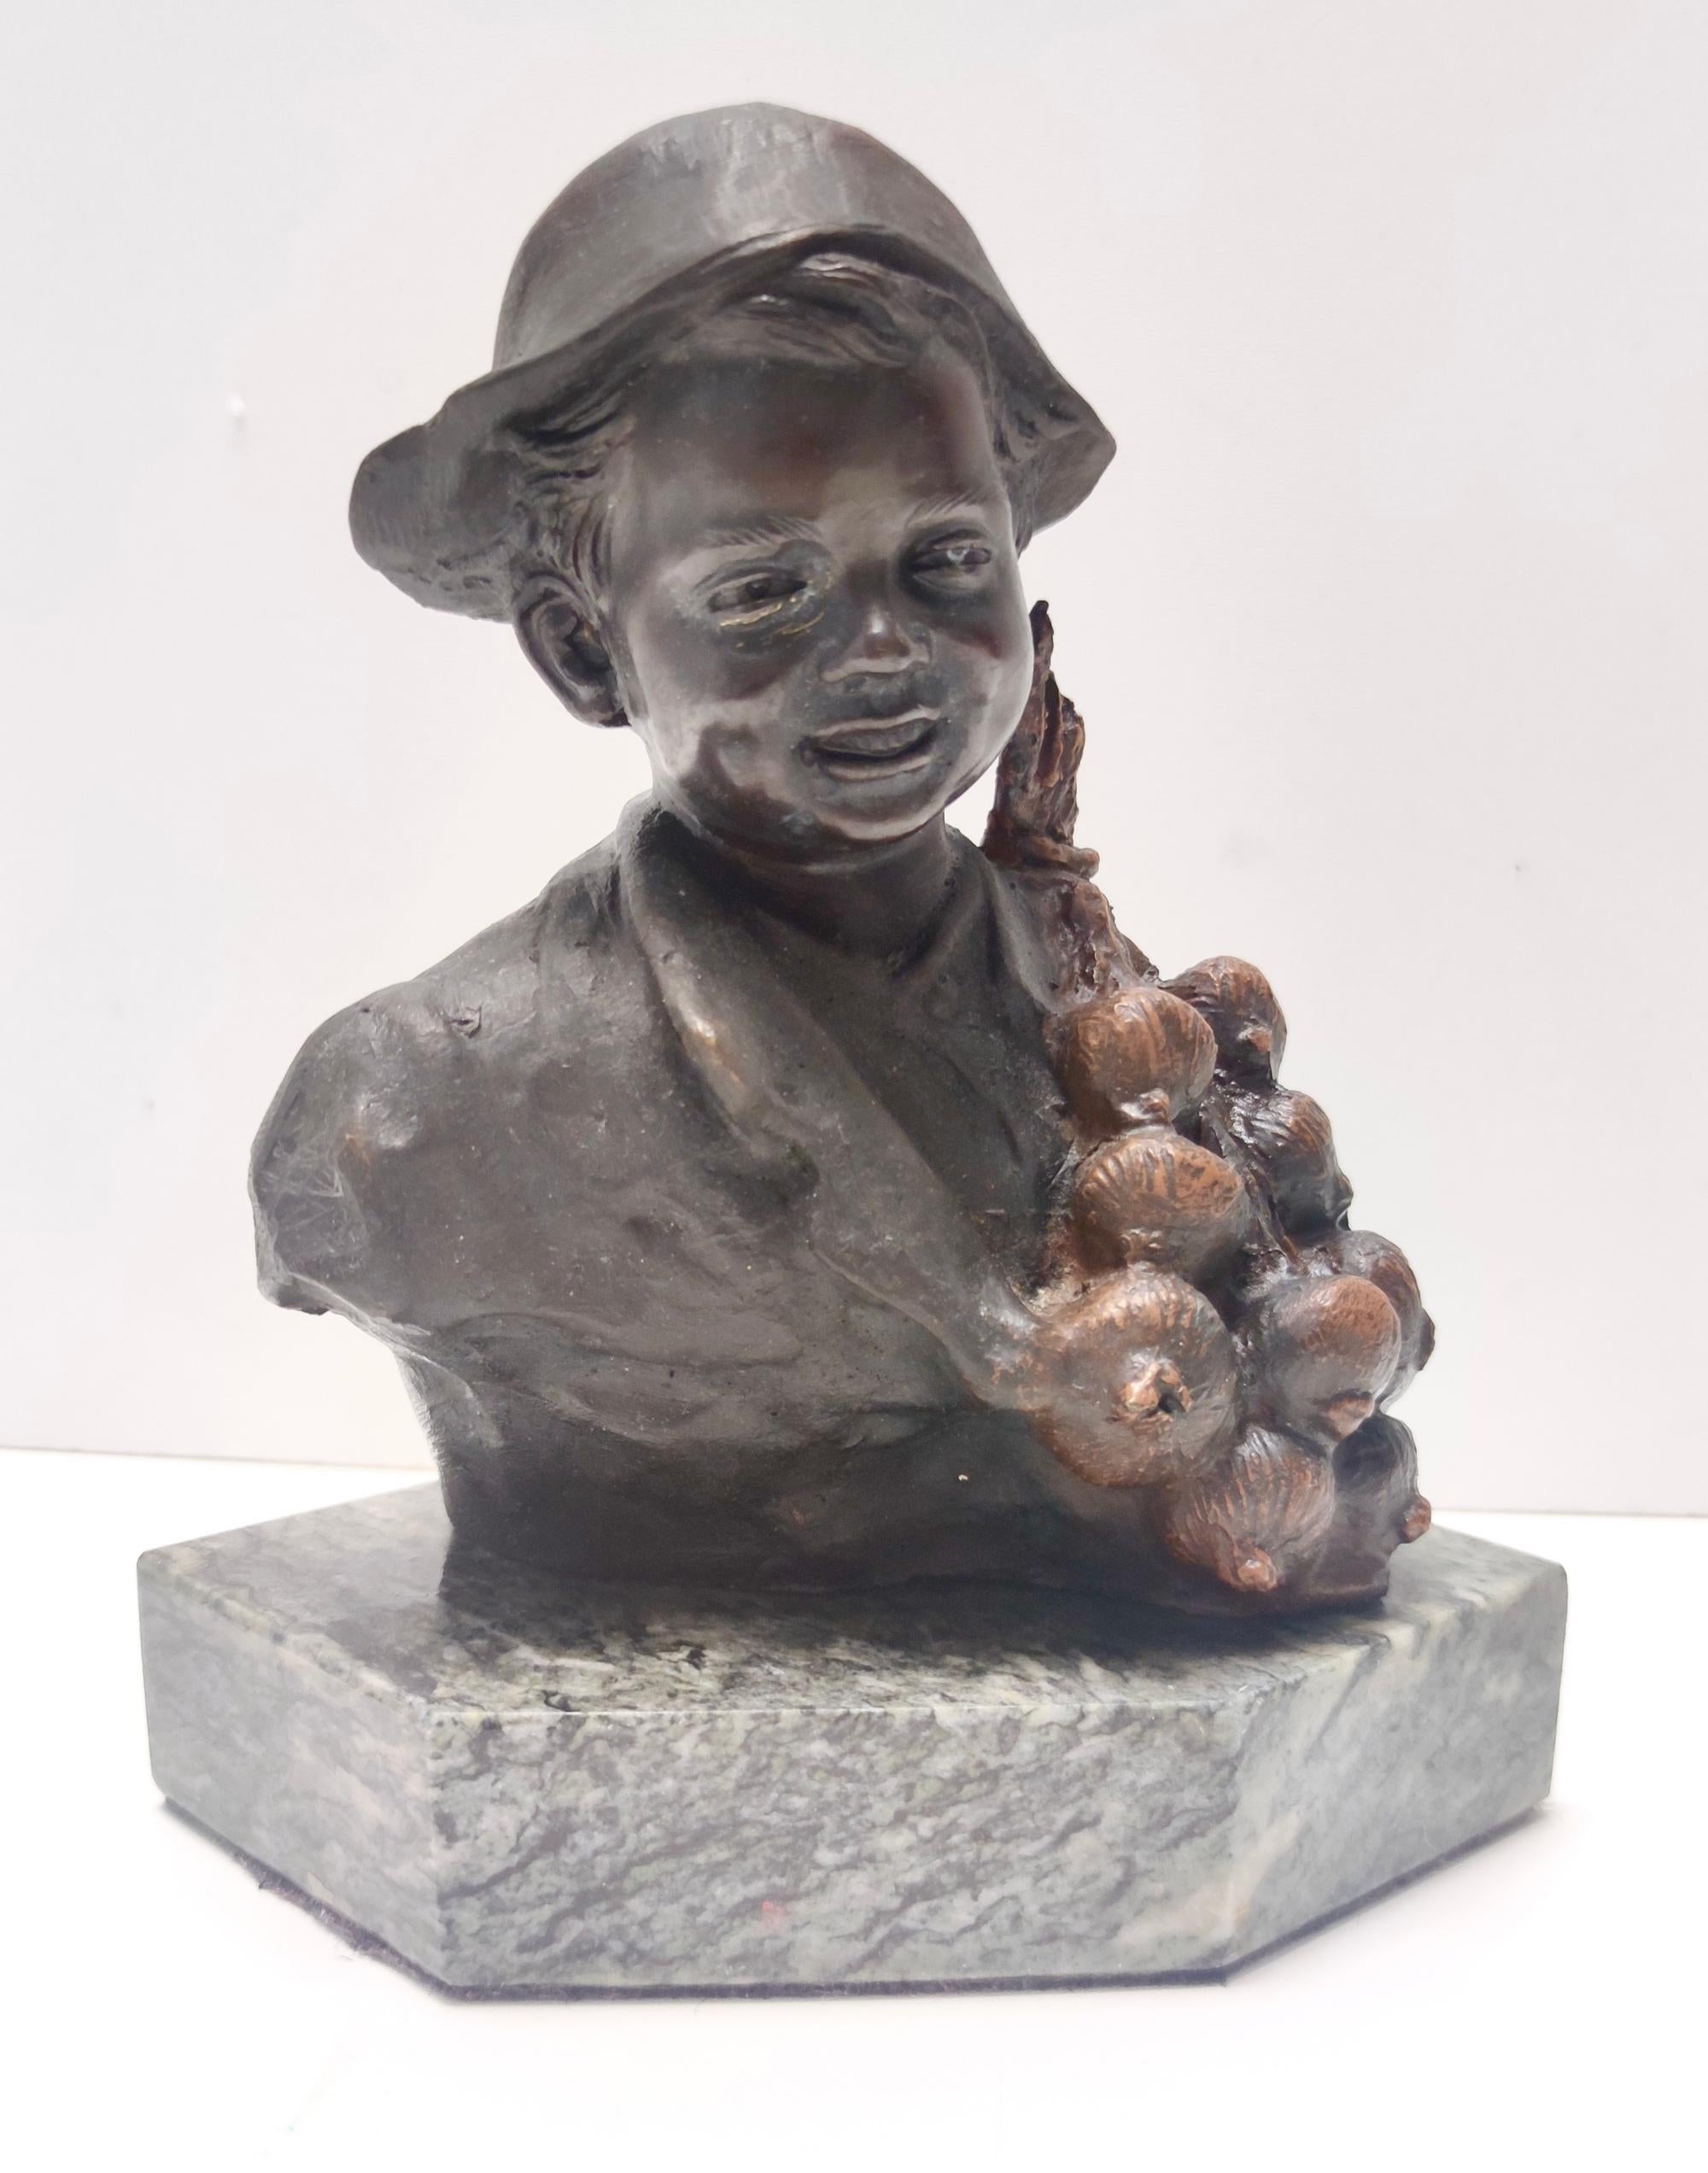 Vintage Bronze Decorative Item of a Child Selling Onions by De Martino, Italy In Excellent Condition For Sale In Bresso, Lombardy